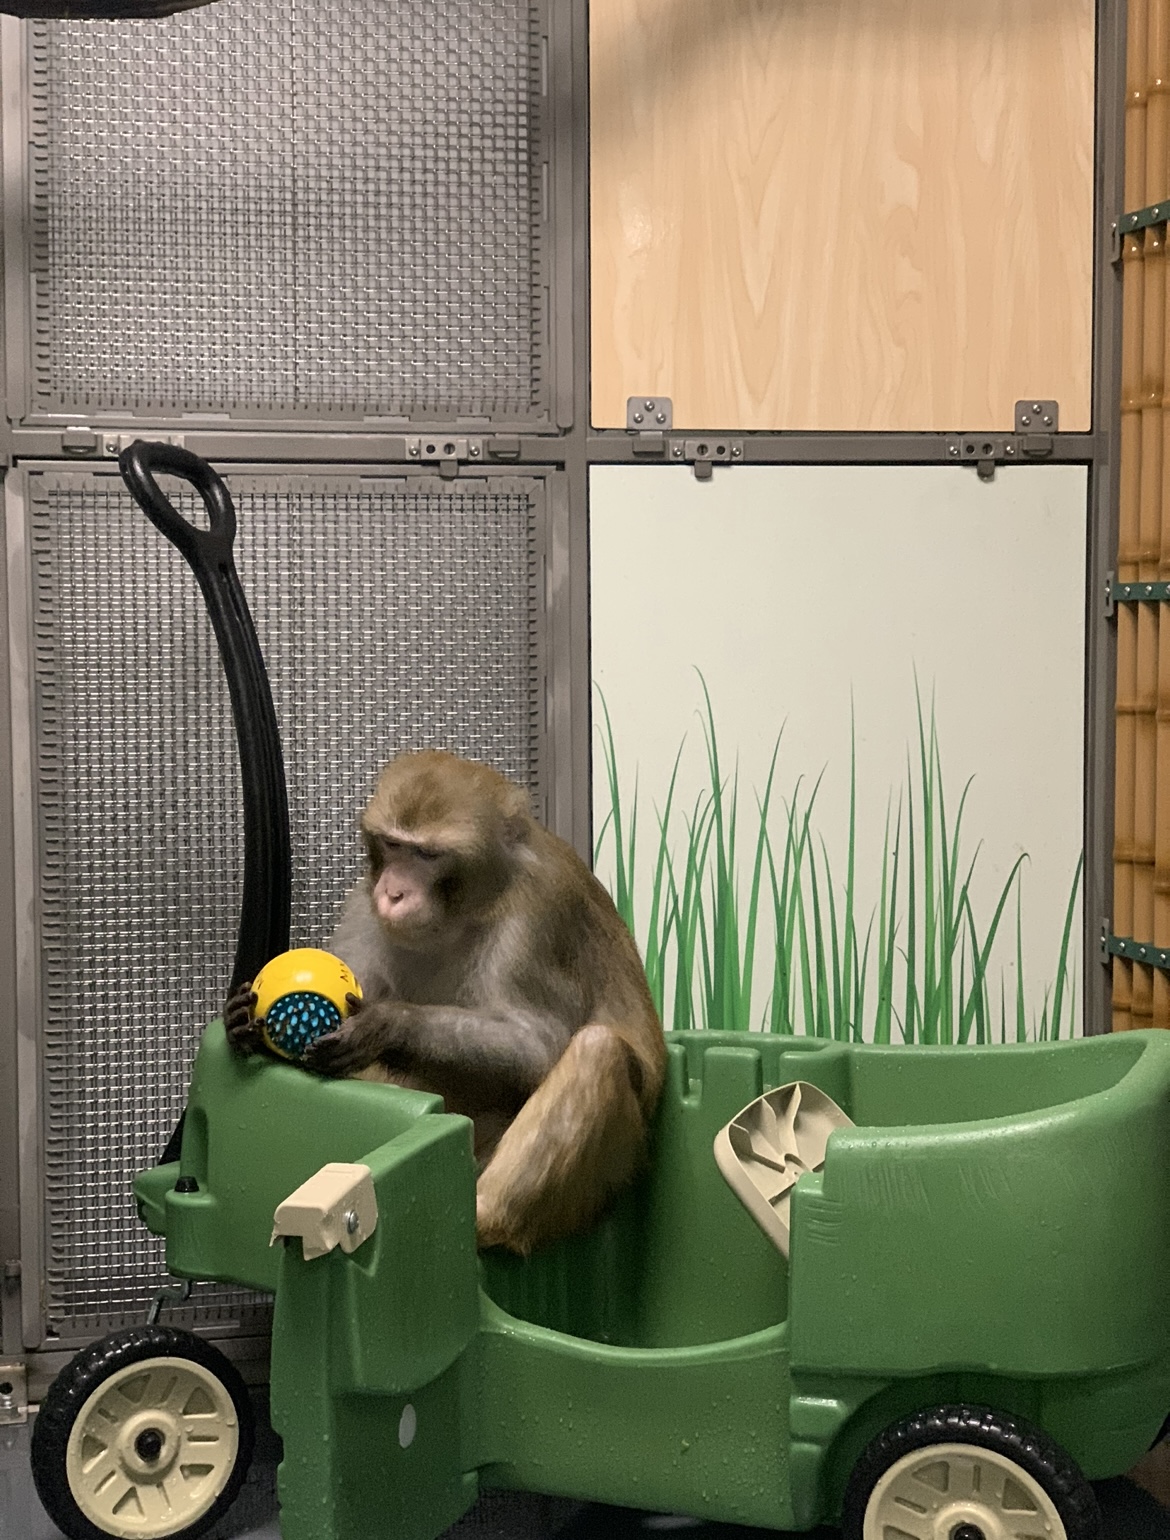 A monkey in Neuralink’s in-house facility.